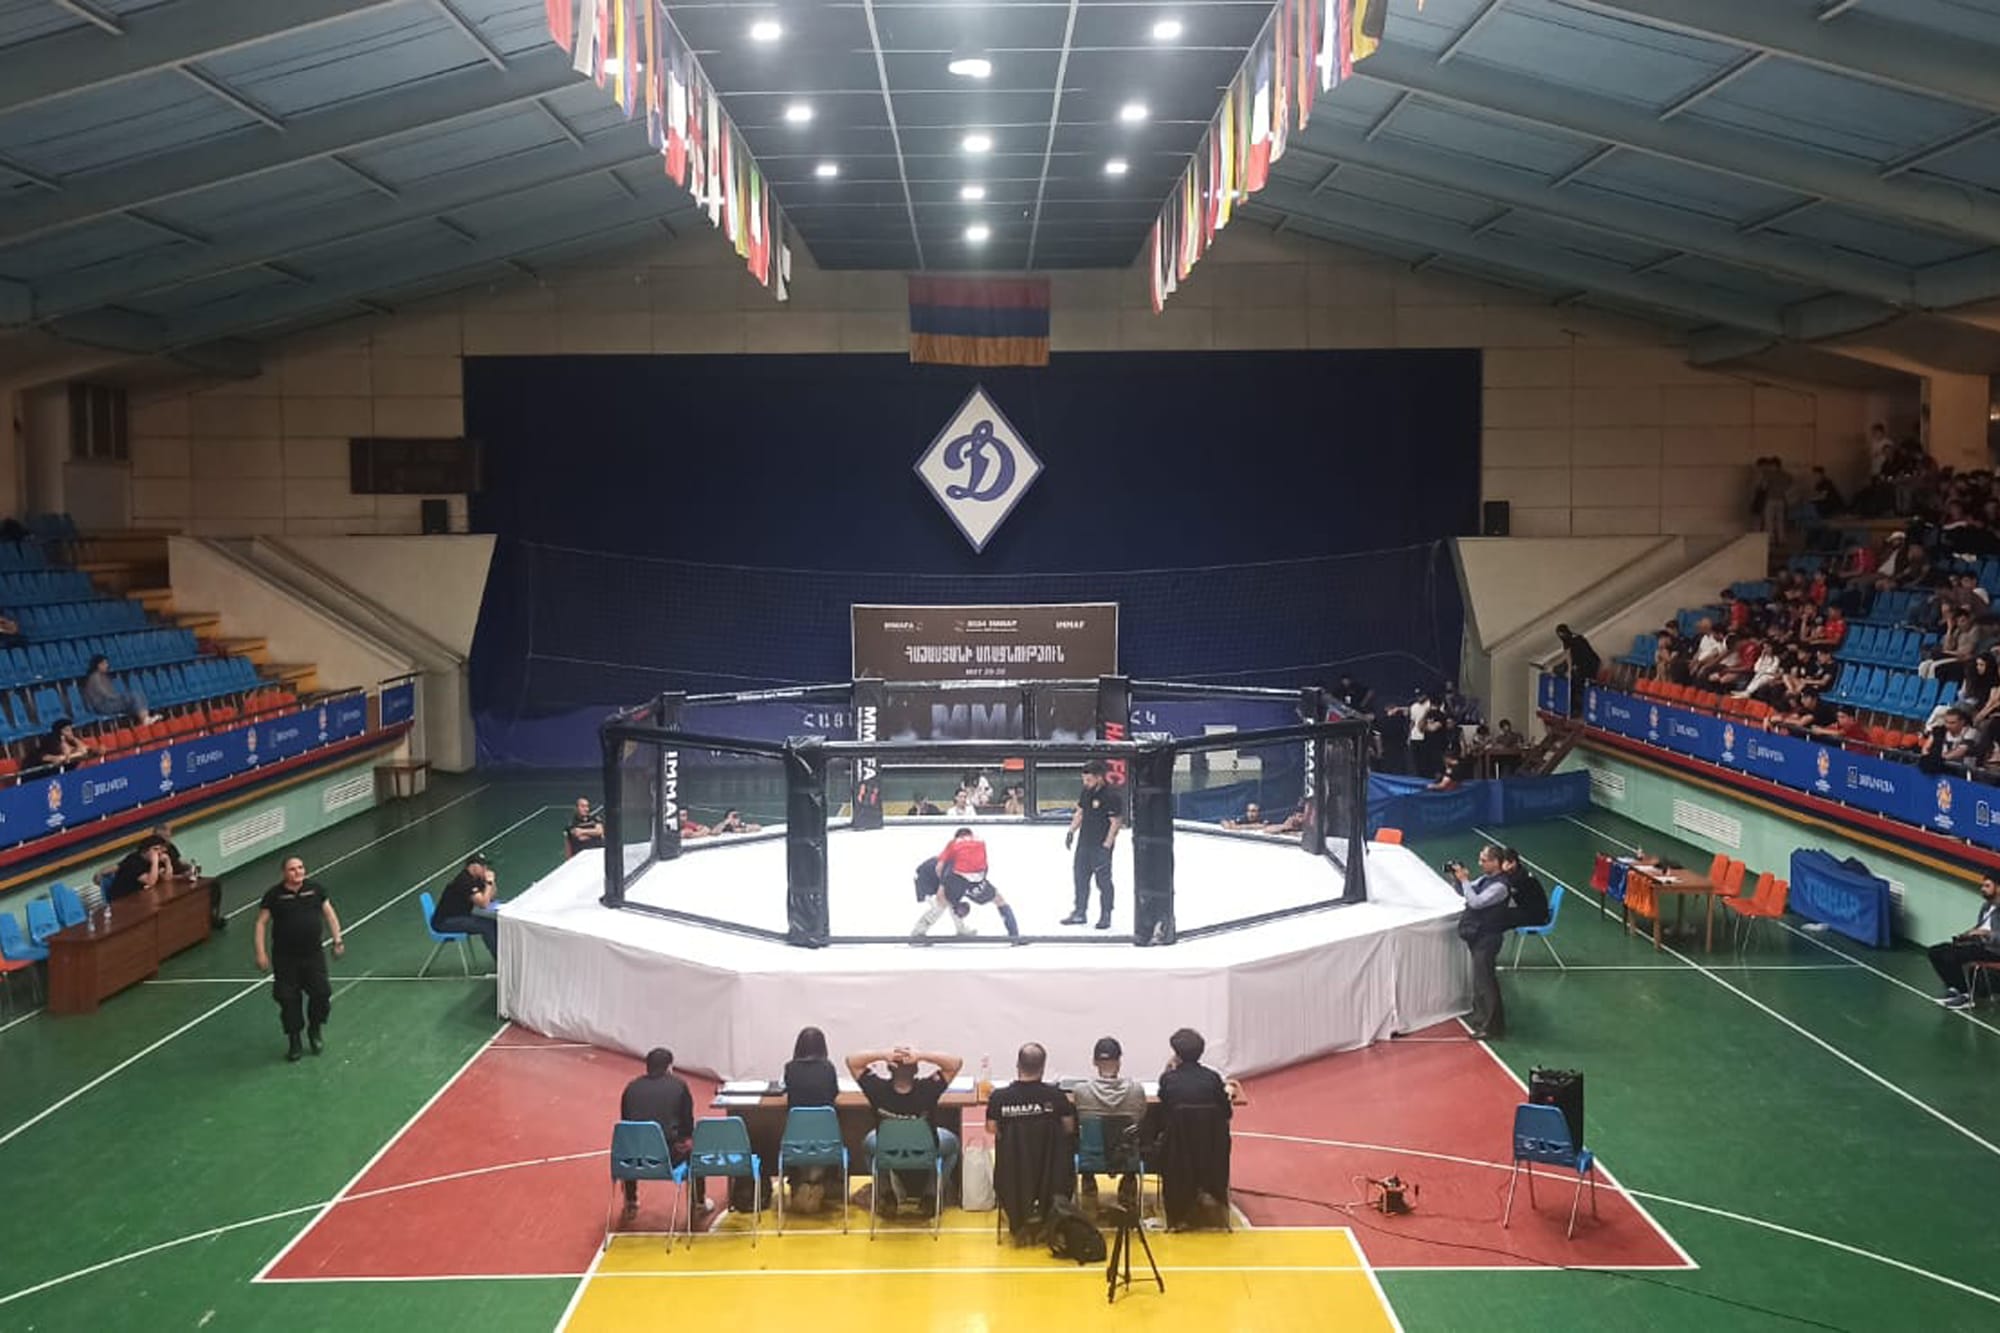 Armenia National Federation holds tournament for IMMAF Youth World Championships qualification with nearly 300 participants